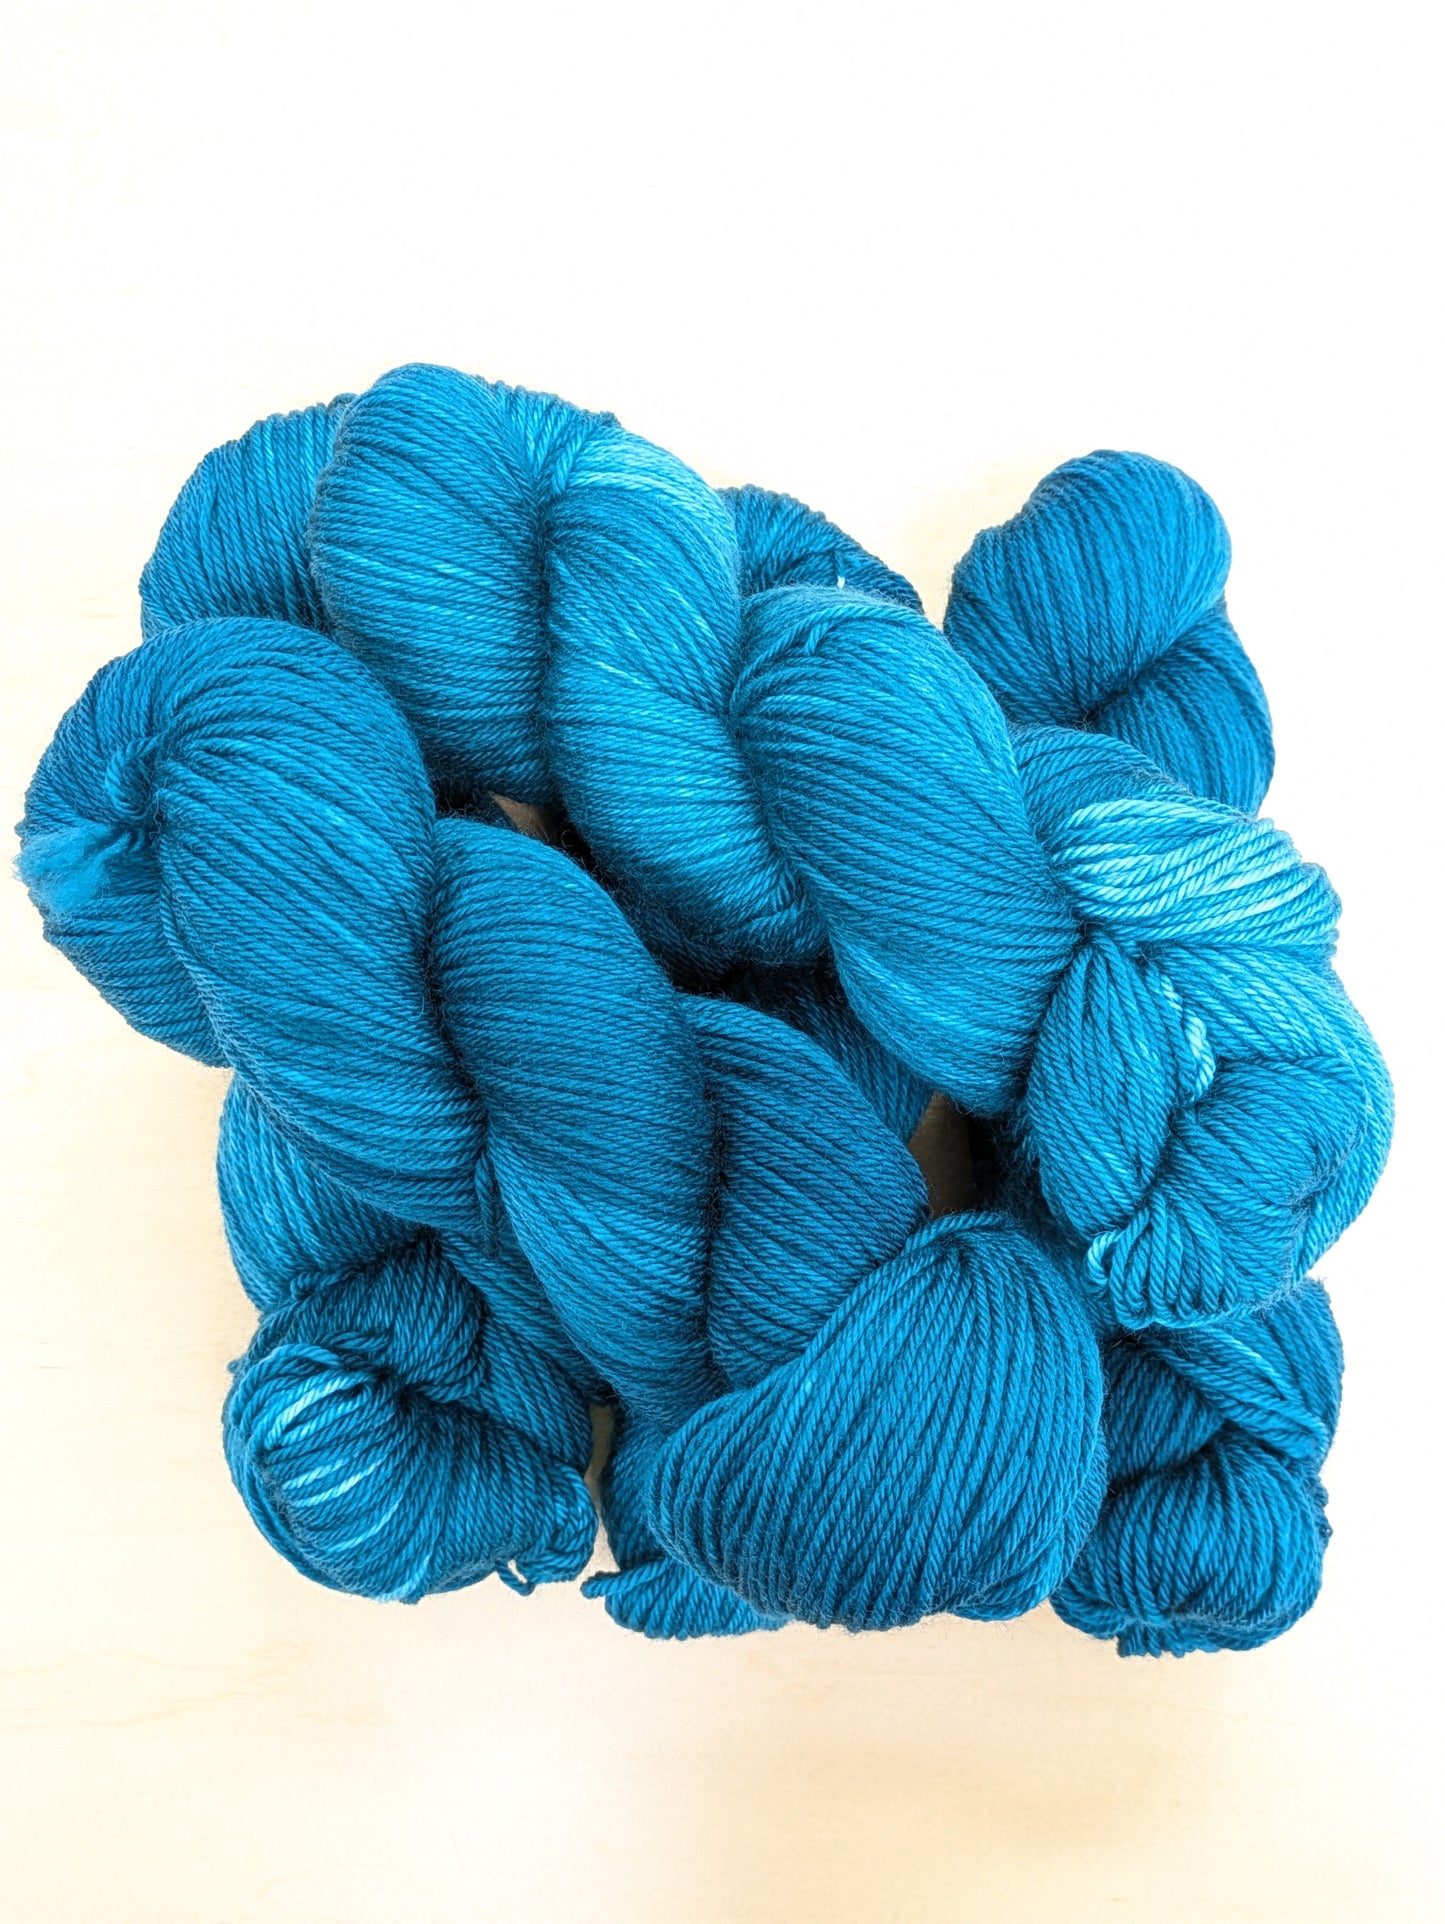 Dolphin Bay Collection DK Weight